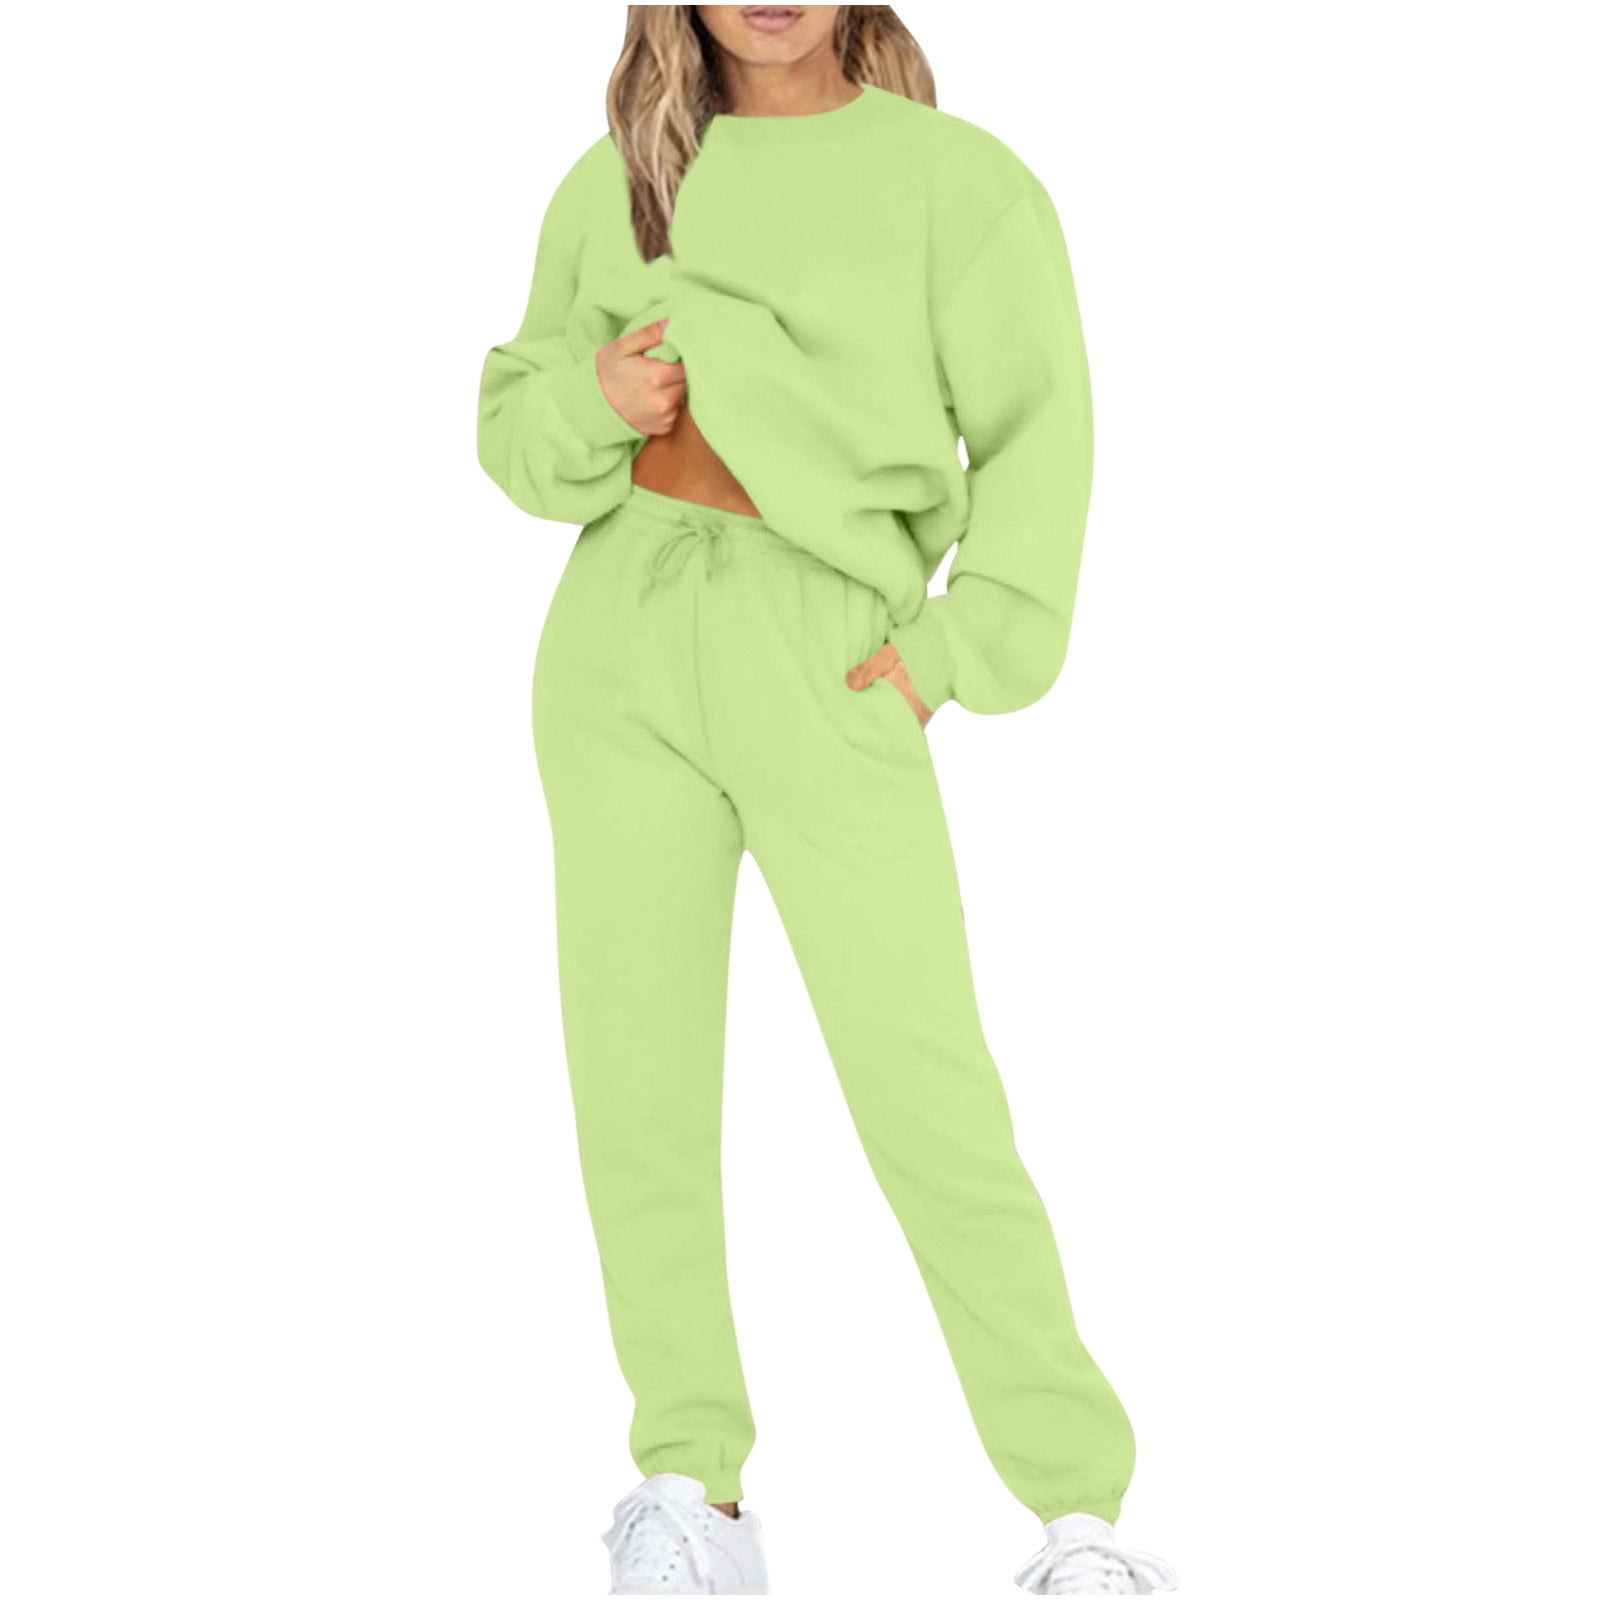 safuny Pants for with Pocket Women Suit Mint Piece 4XL Long Round Sleeve Pants Skinny Casual Sets Green Outfits Long Loose 2 Sweatshirts Tops Neck